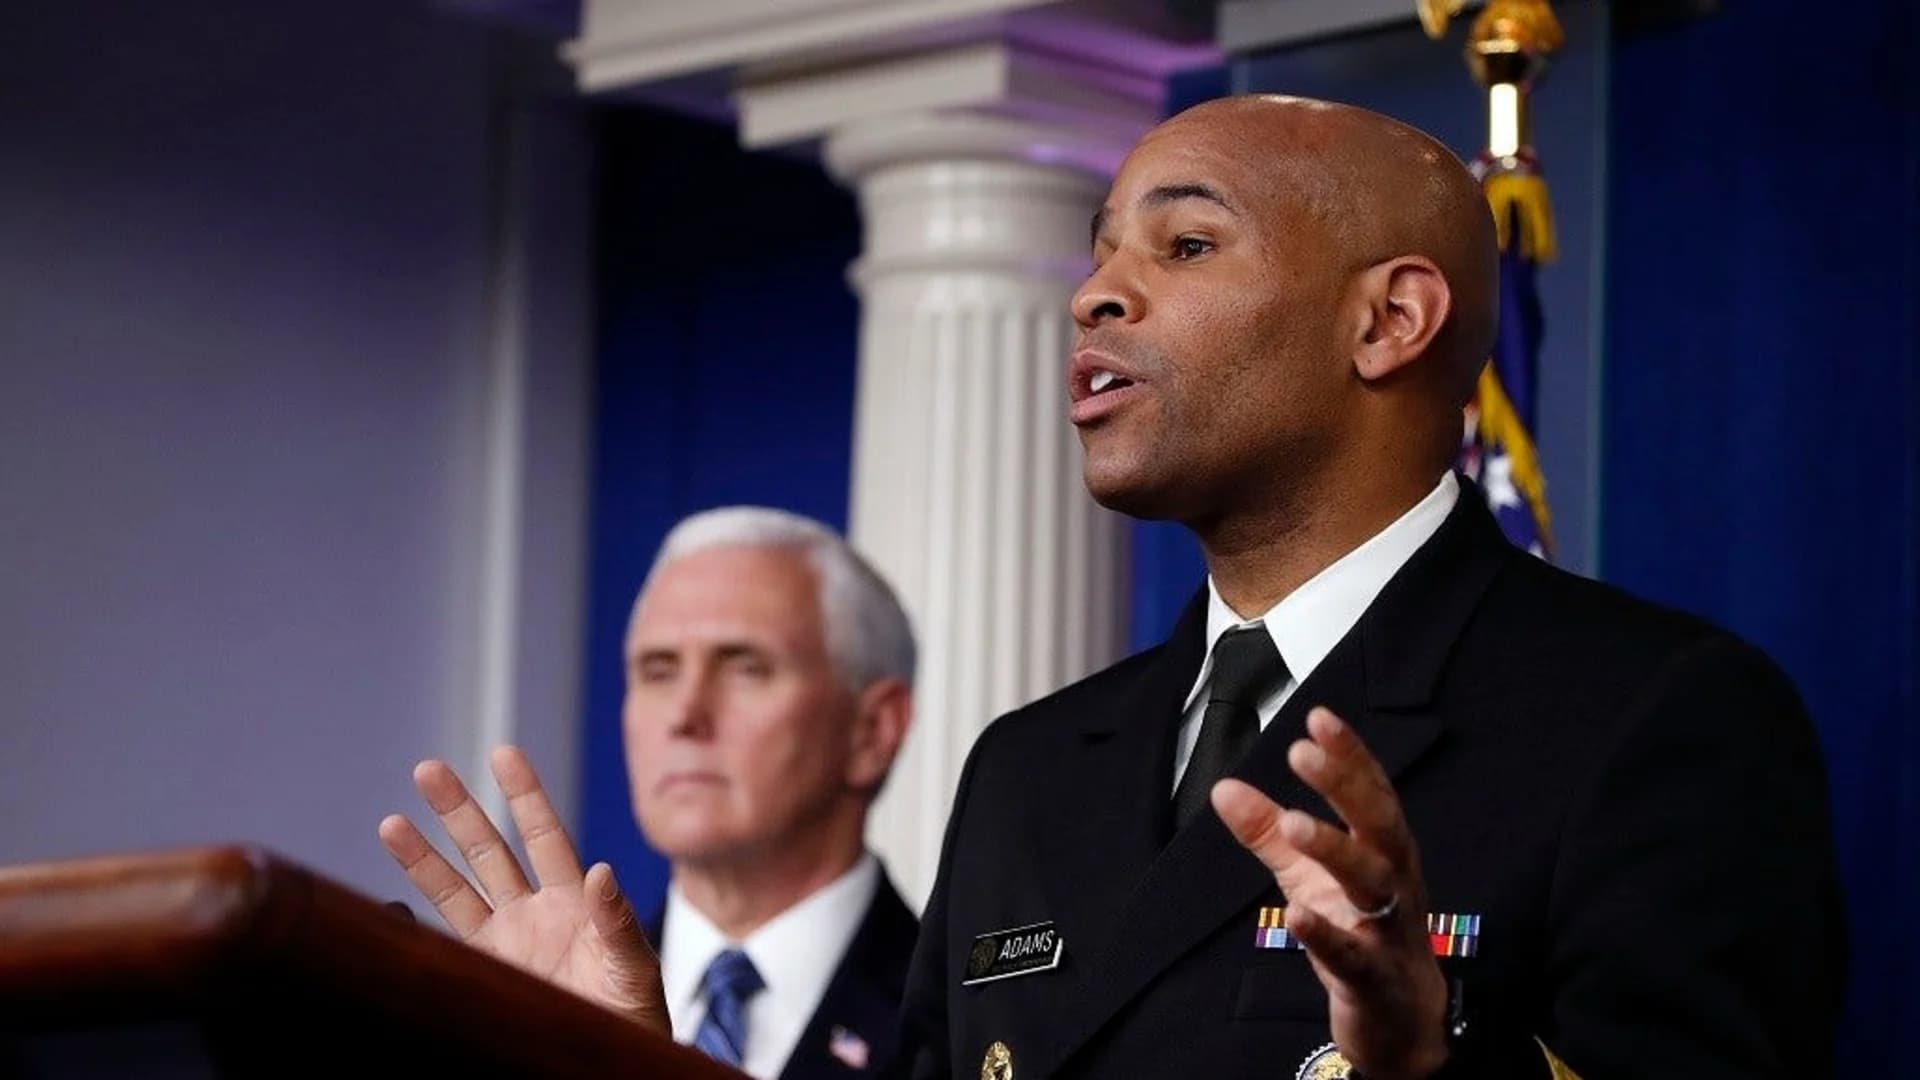 Surgeon general braces Americans for 'the hardest and the saddest week'